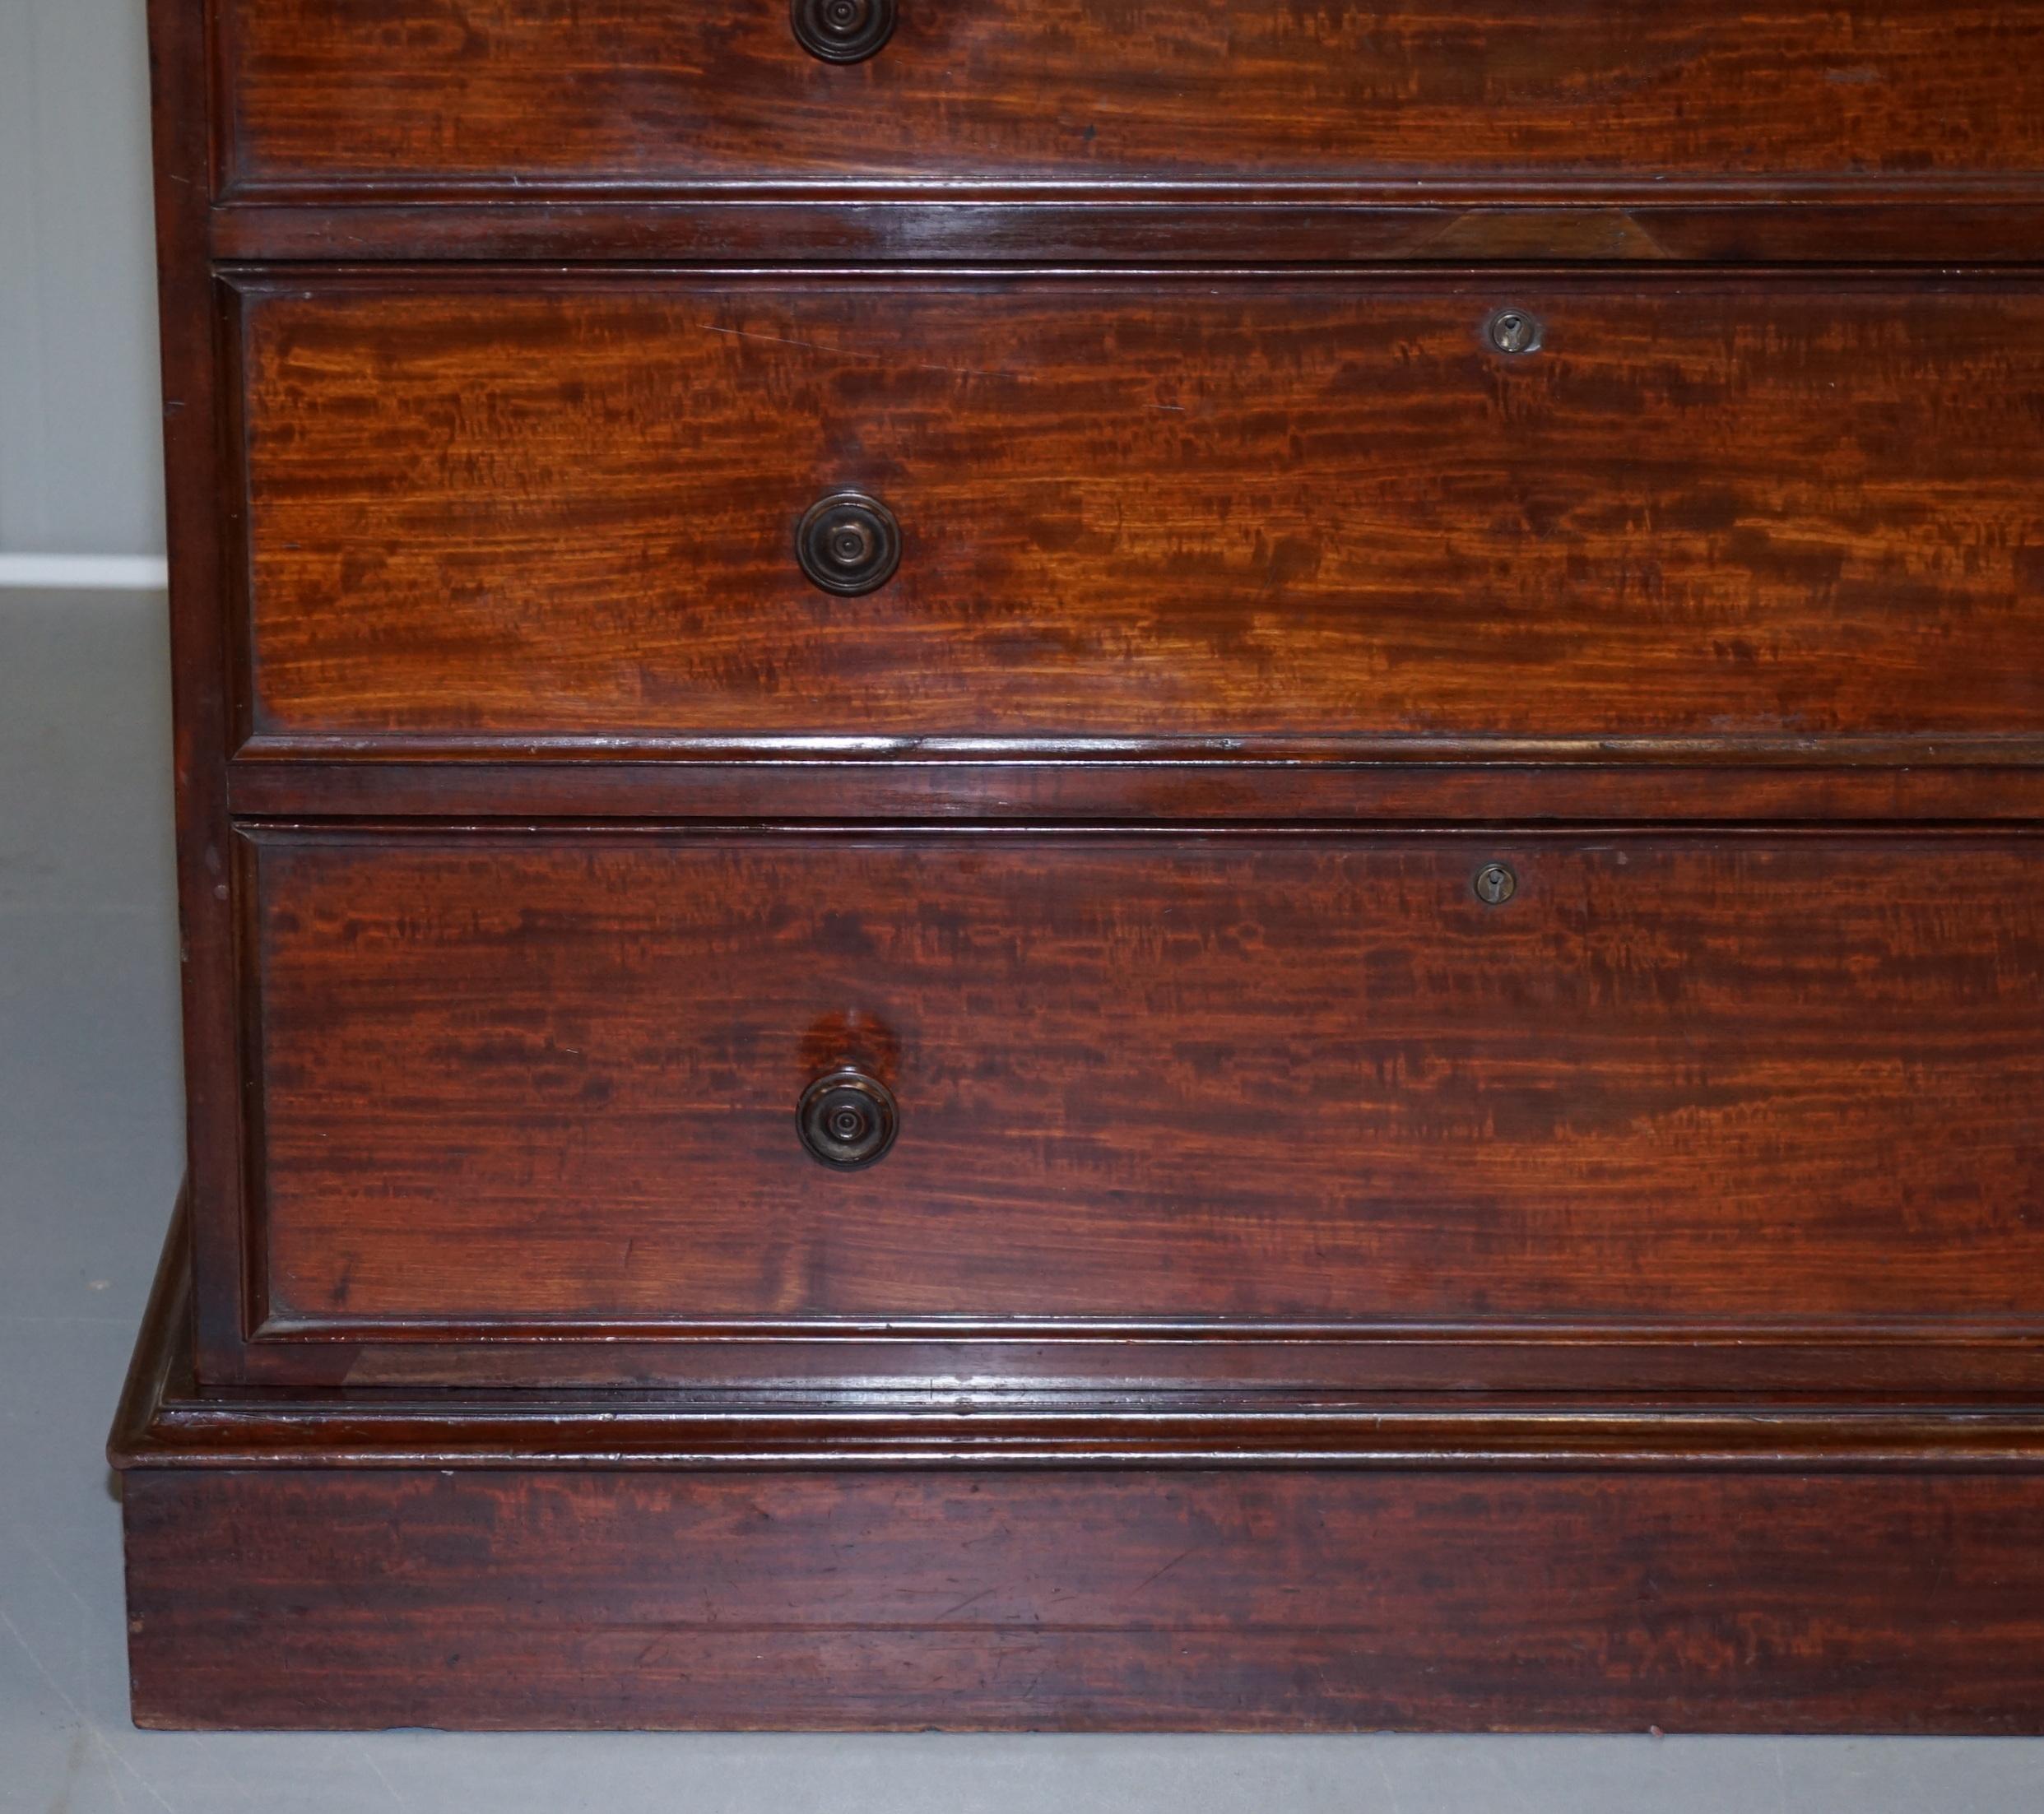 Rare circa 1760 Thomas Wilson 68 Great Queen Street Hardwood Chest of Drawers For Sale 4